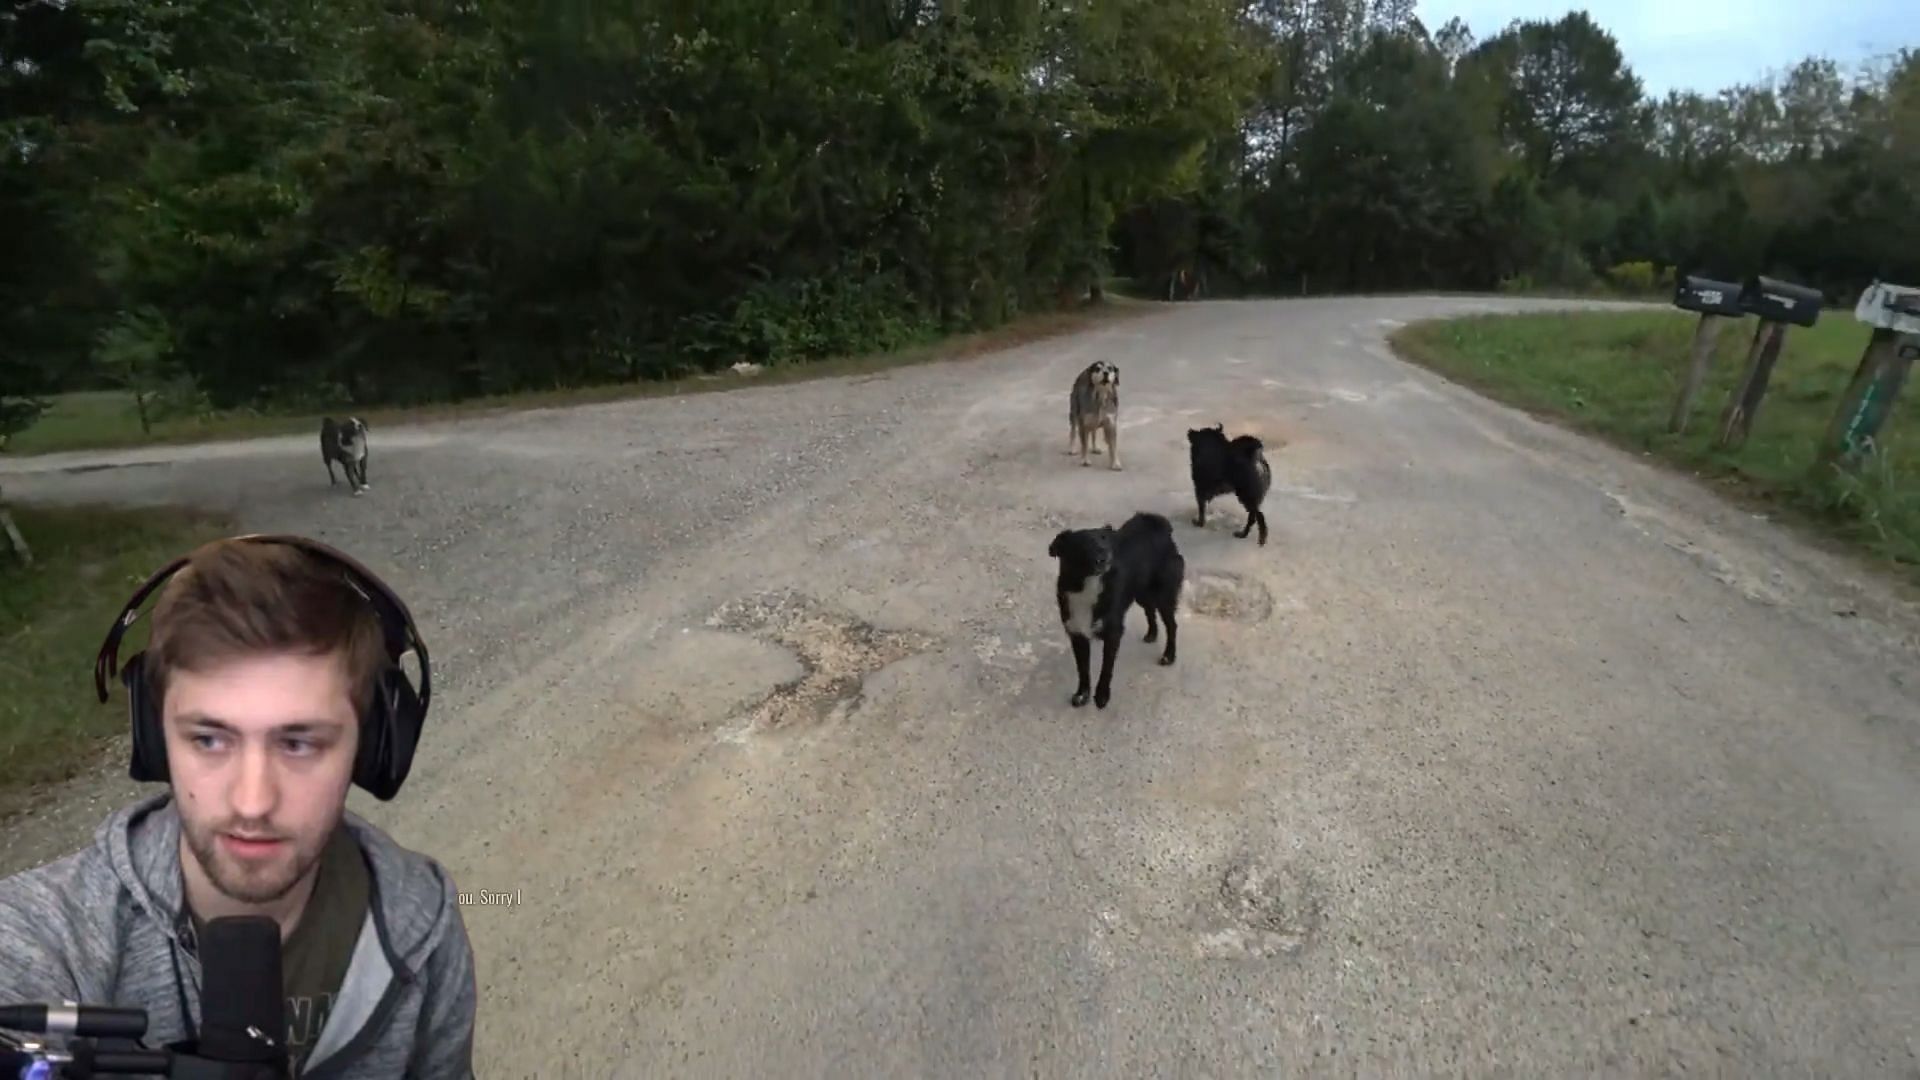 Sodapoppin was chased by dogs while live on stream (Image via Sportskeeda)